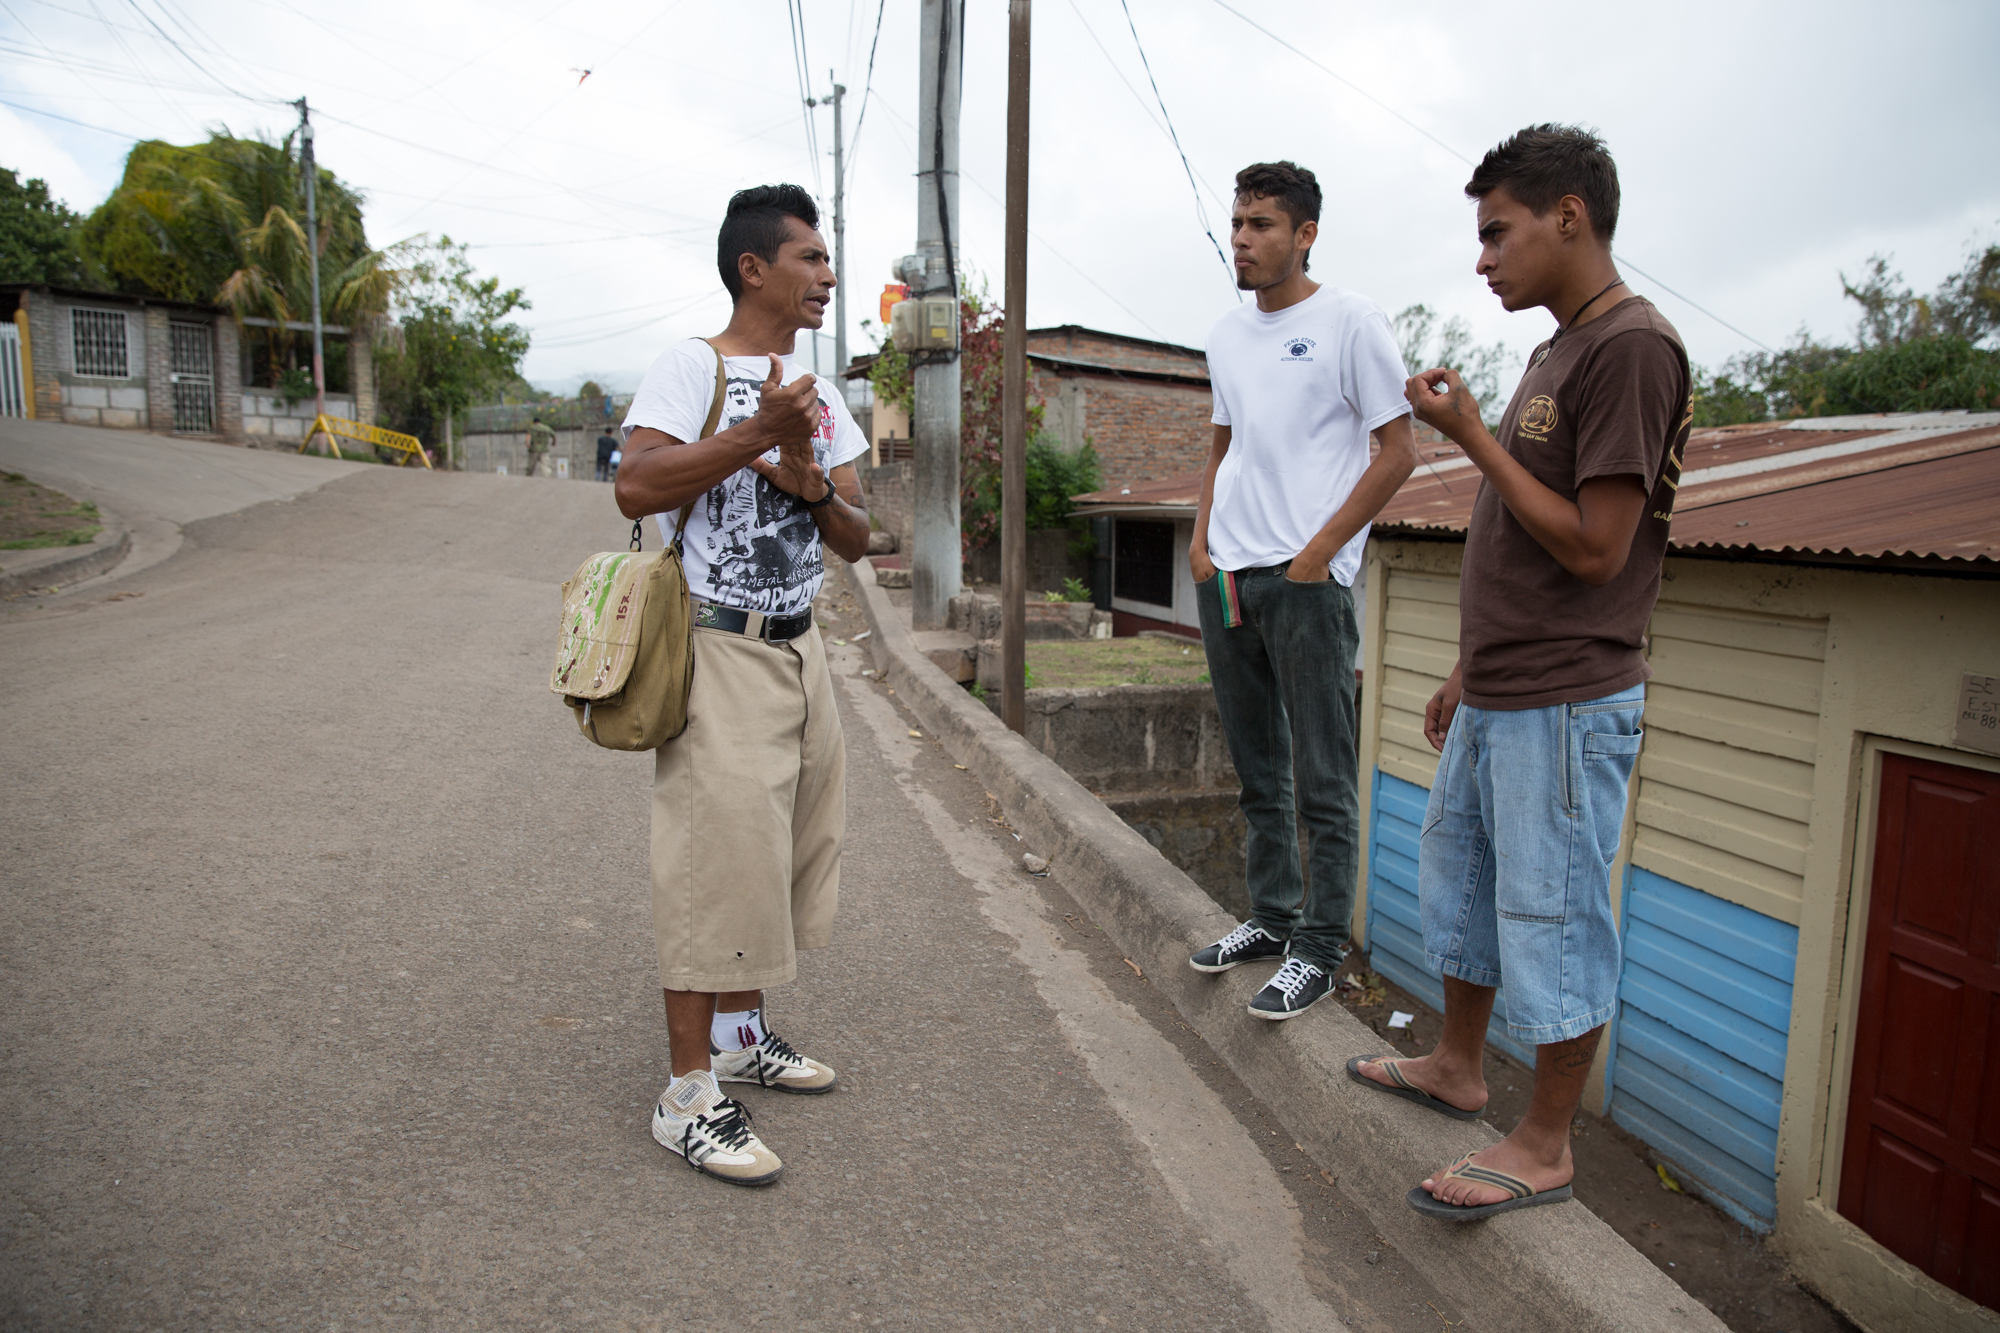  Jairo Blanchard (left) speaks with two boys in his neighborhood who are members of a gang called Mata Perros (The Dog Killers). He says this gang is one of the ones he has a lot of problems with because some of the members are involved with alcohol 